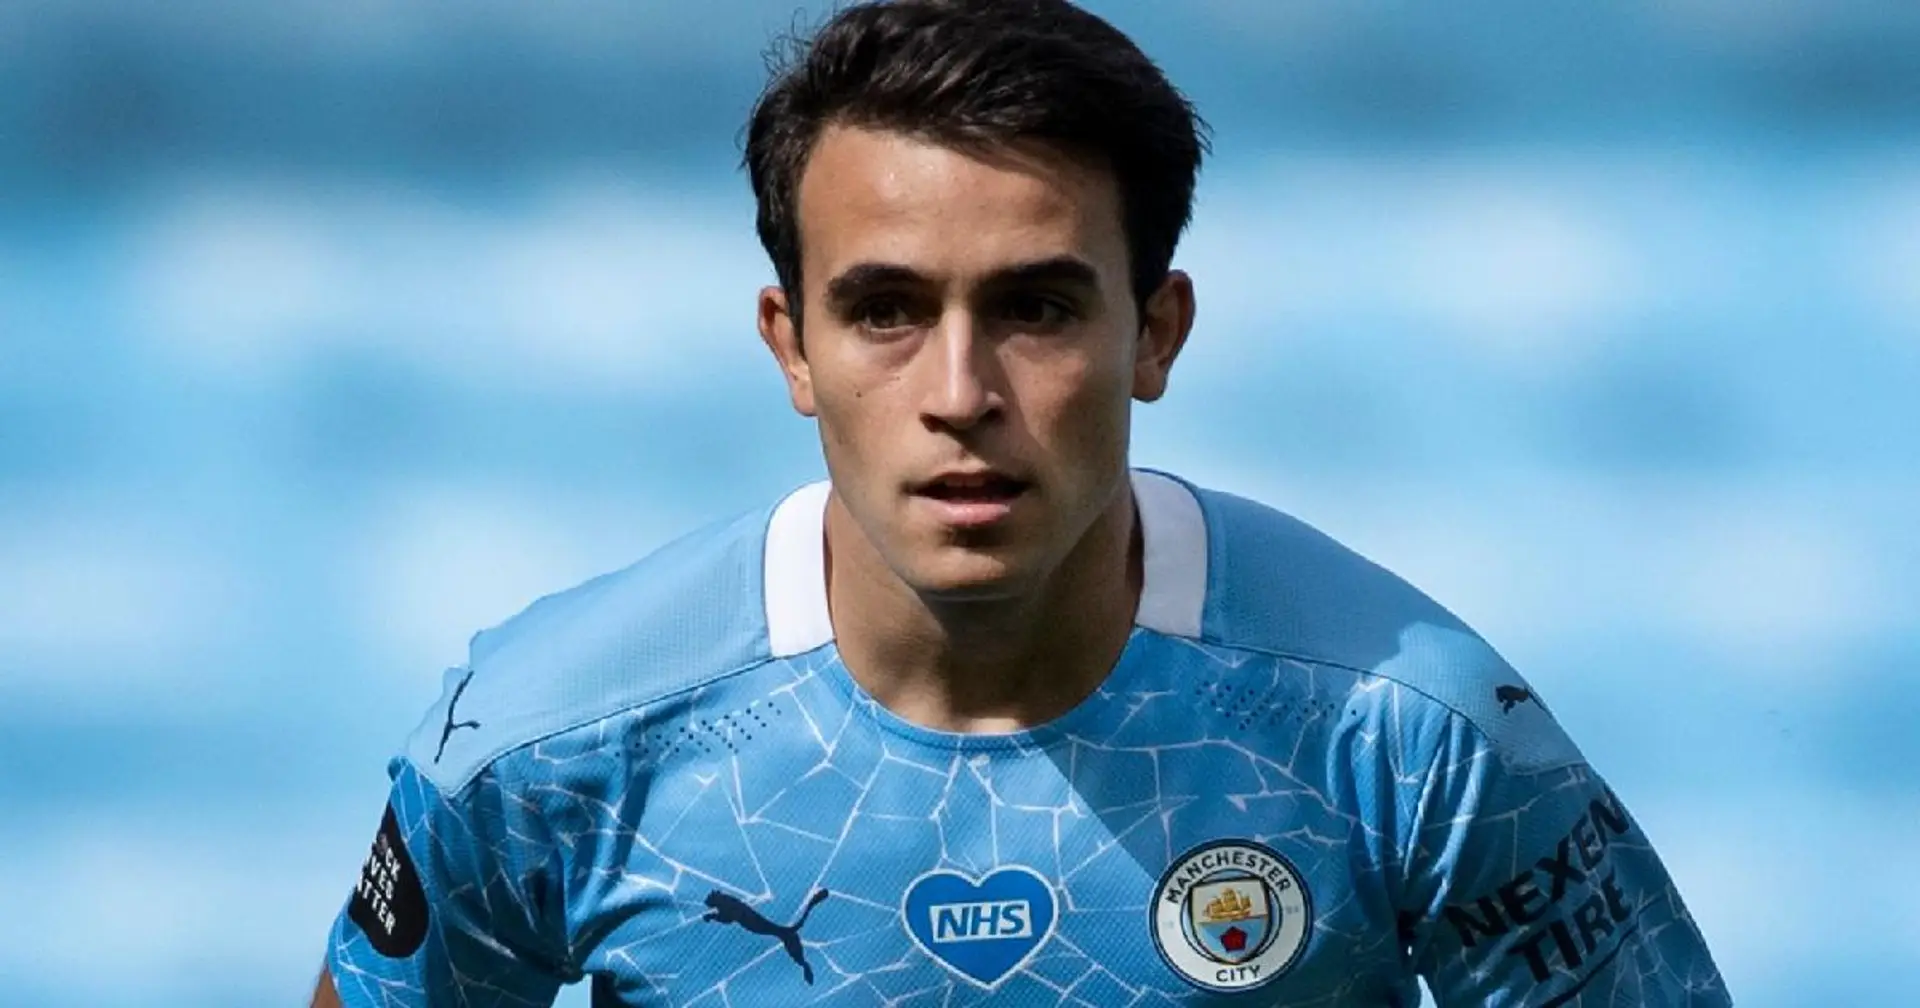 Barca close to Eric Garcia signing, only one agreement remains to be confirmed (reliability: 4 stars)